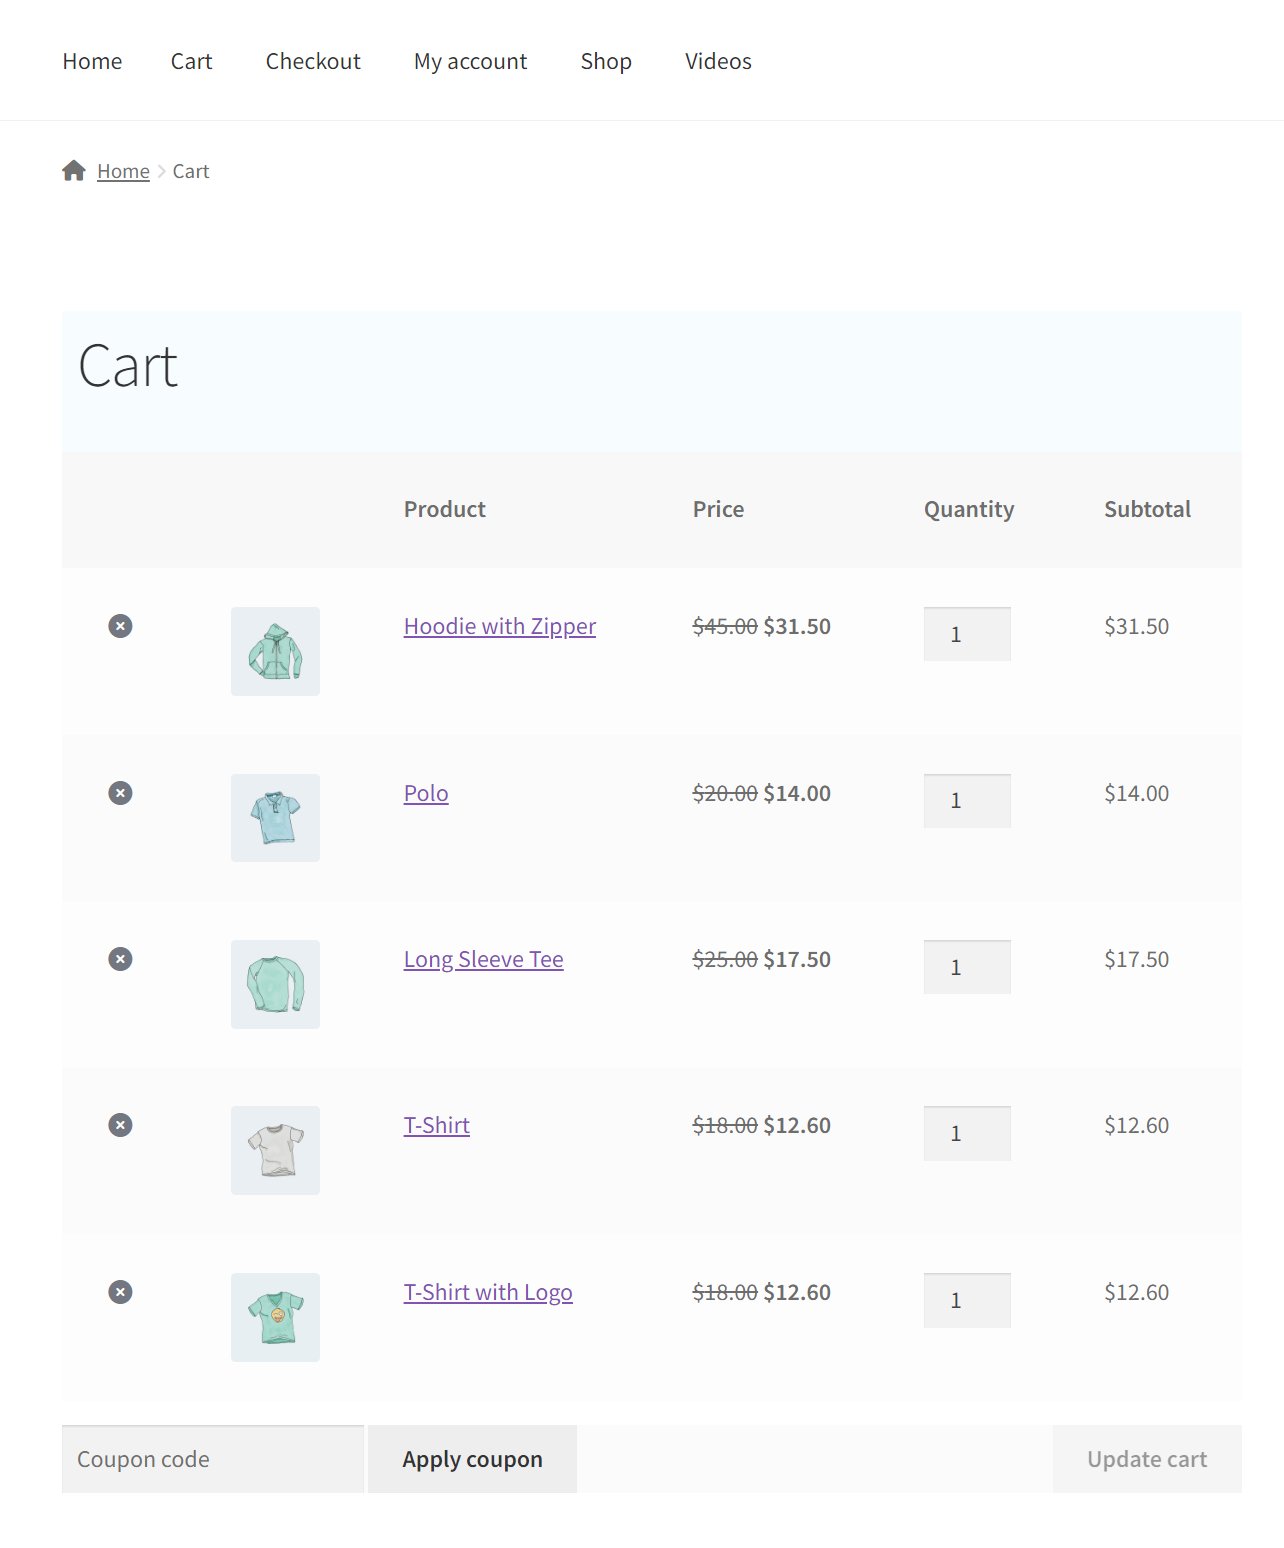 Category rules discounted cart | |Change Product Price Based On Quantity 